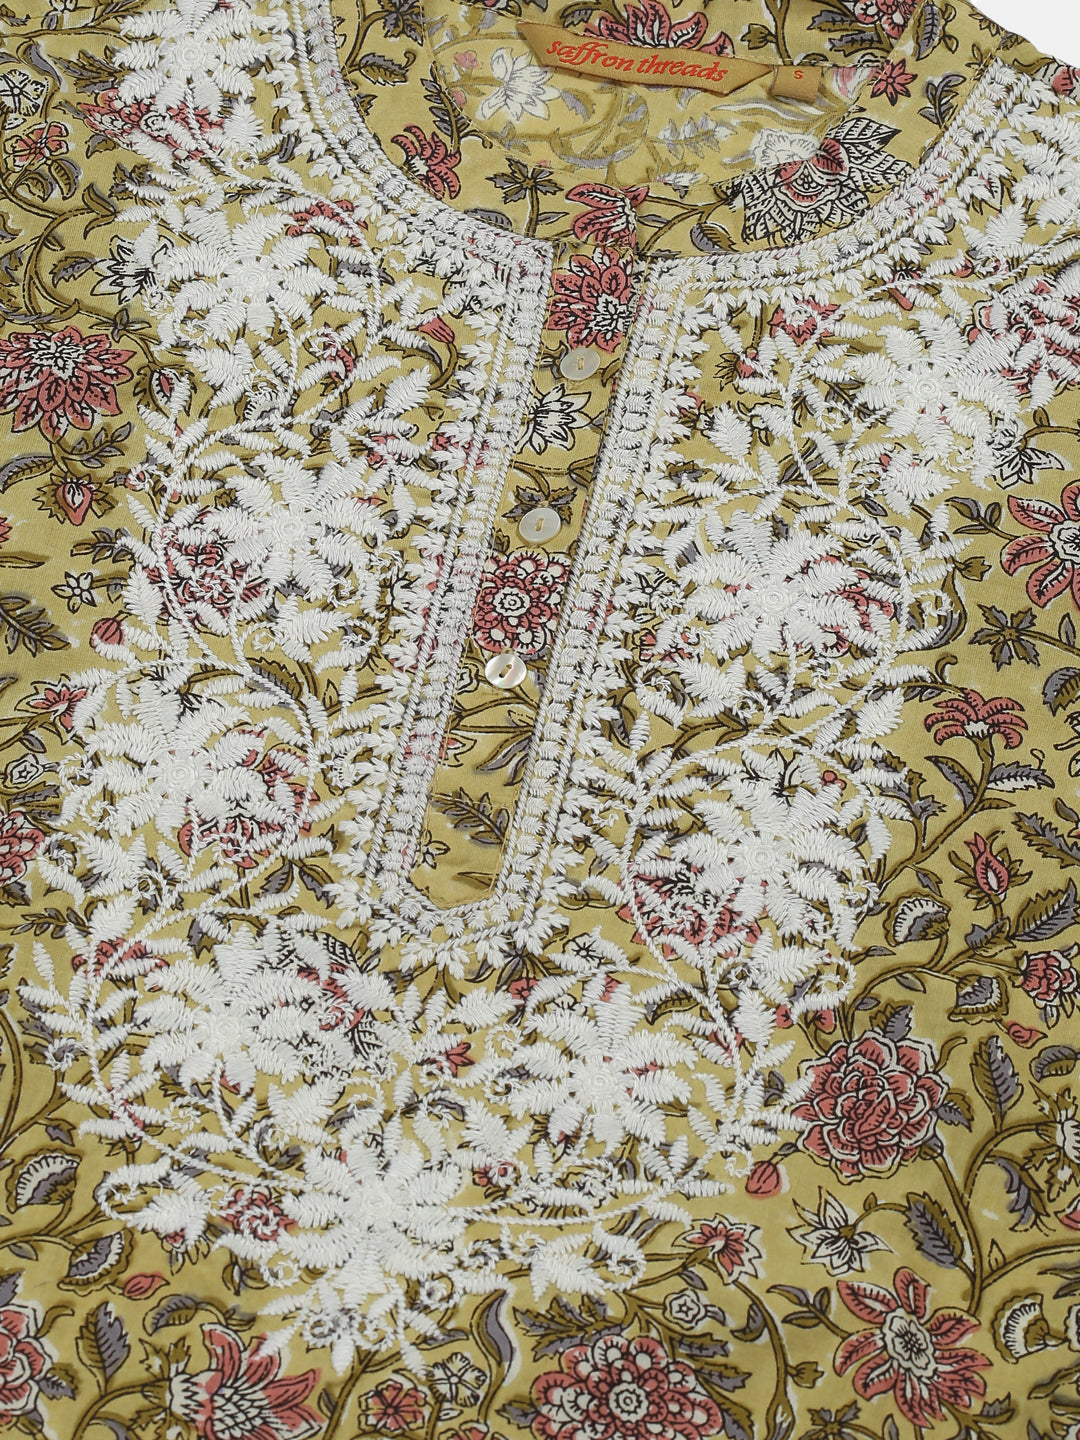 Yellow Floral Print Tunic with Lucknowi Chikankari Embroidery